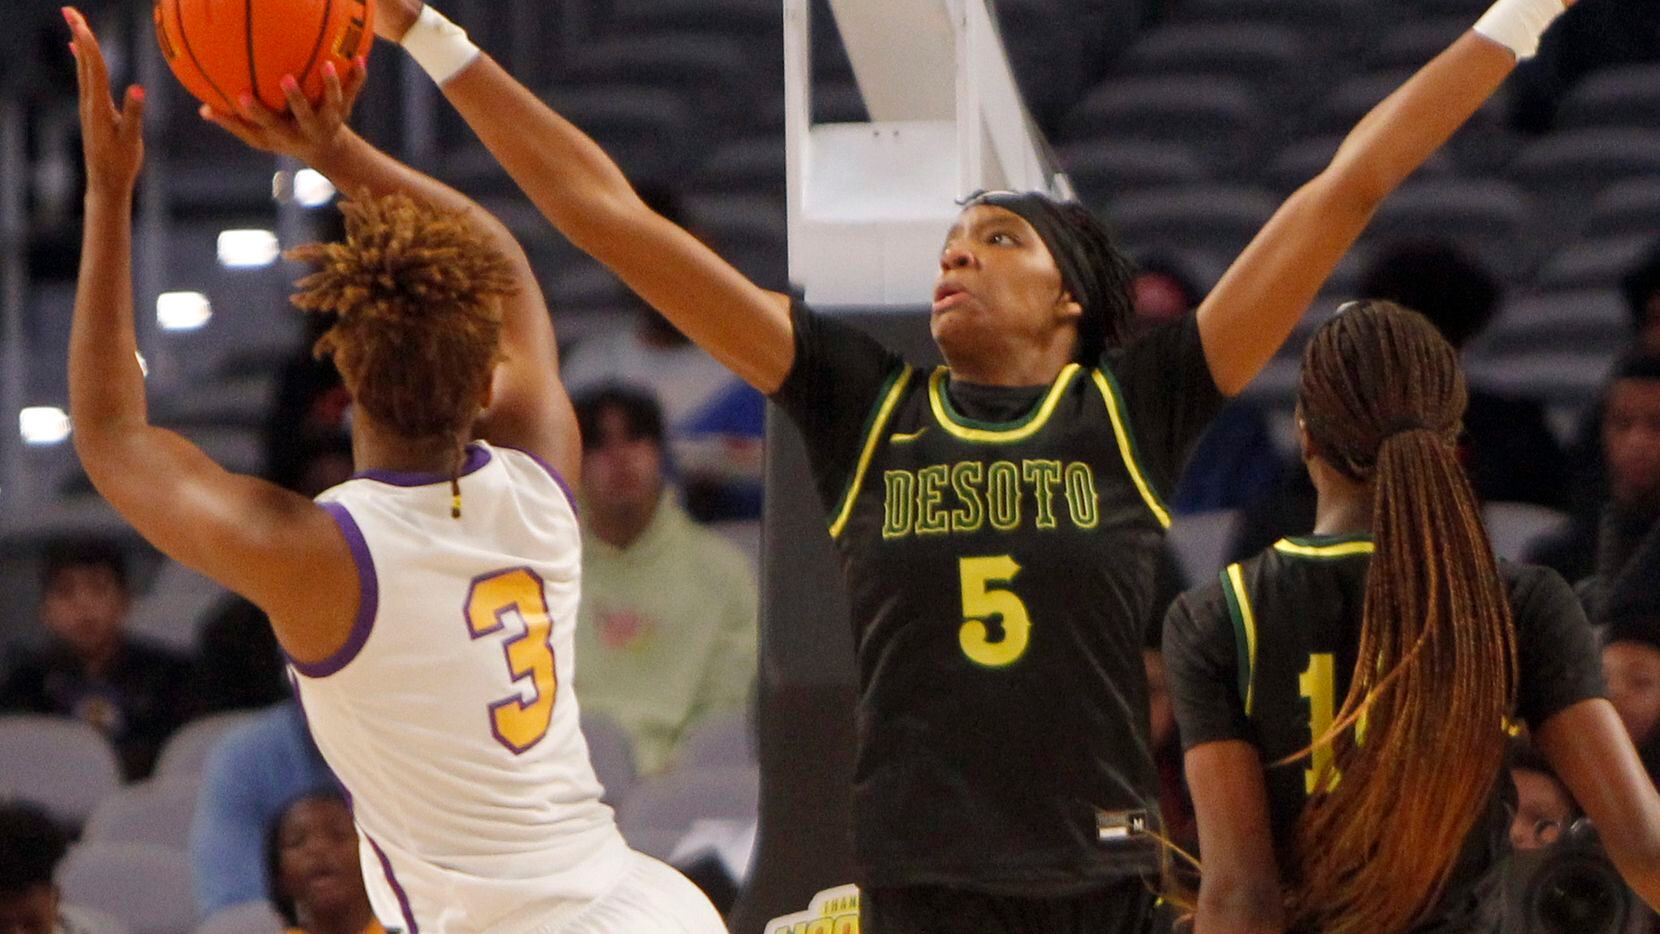 DeSoto senior Sa' Myah  Smith (5) defends a shot by Montverde forward Janiah Barker (3) during first half action. The two teams played their basketball game as part of the Thanksgiving Hoopfest which was held at Dickies Arena In Fort Worth on November 27, 2021. (Steve Hamm/ Special Contributor)